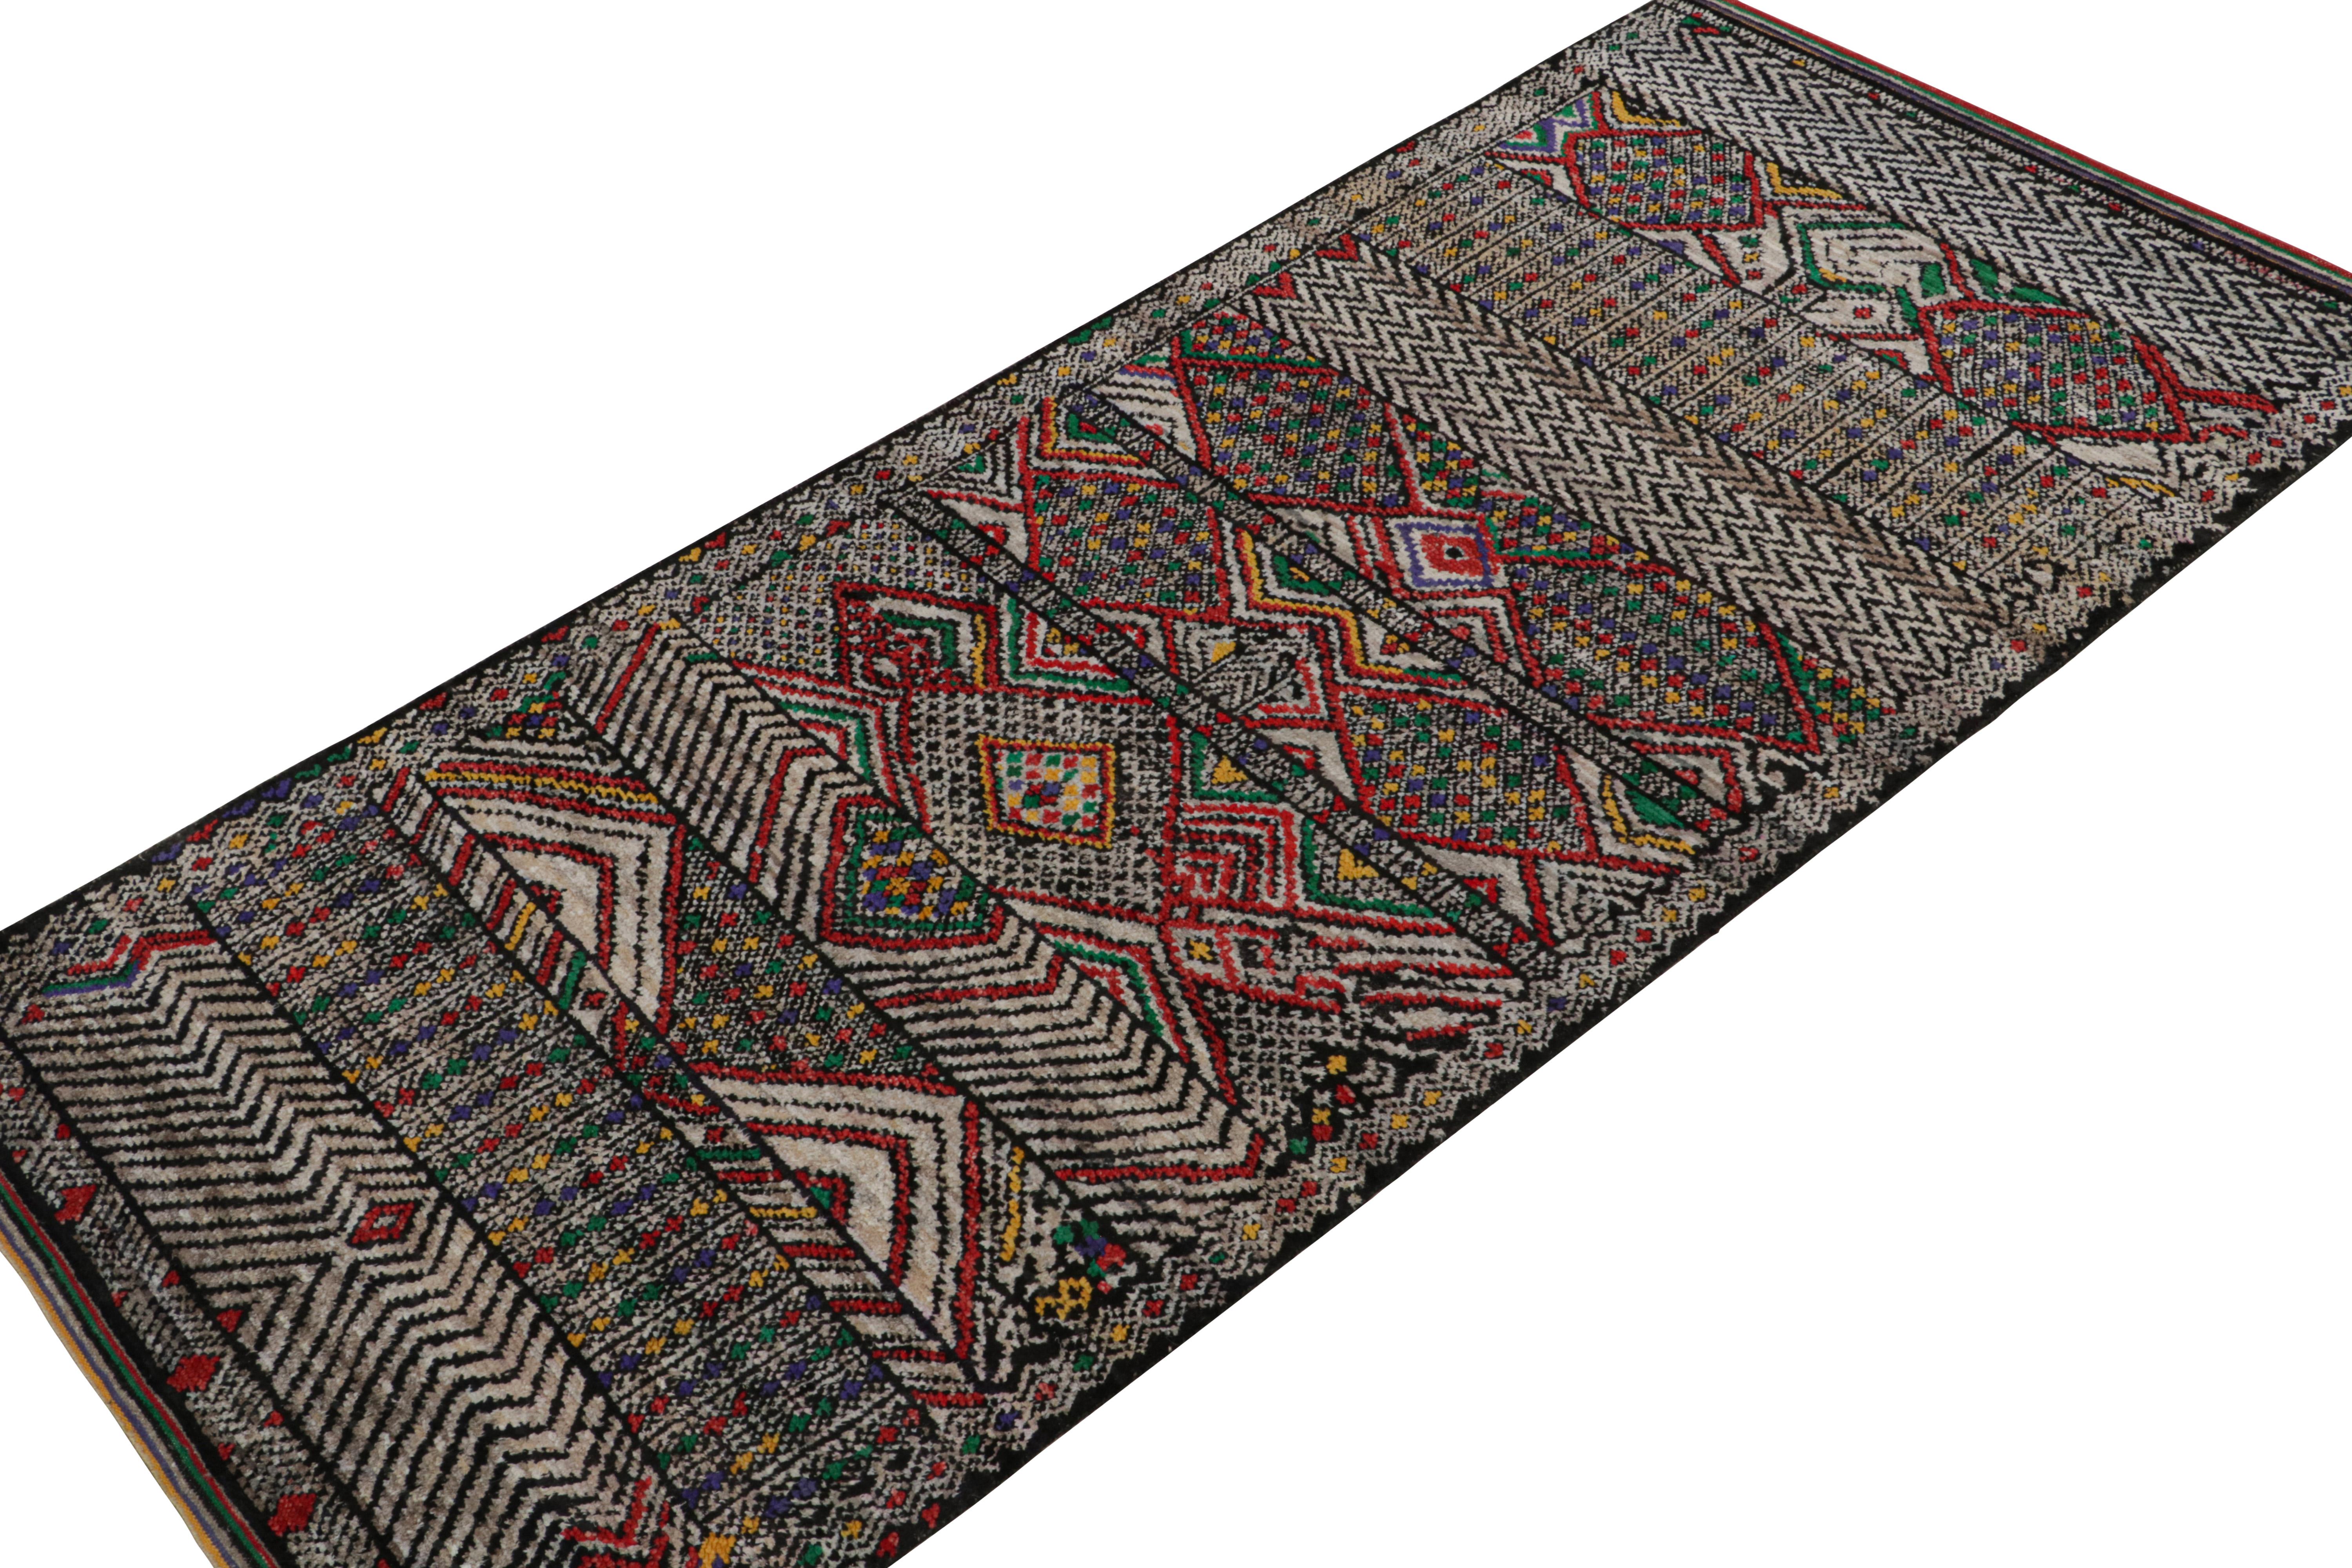 Hand-knotted in wool, silk & cotton, this 5x12 rug is a new addition to the Moroccan Collection by Rug & Kilim. 

On the Design

This rug enjoys primitivist style with patterns in black, gray, red, blue & green. Connoisseurs will admire this as a